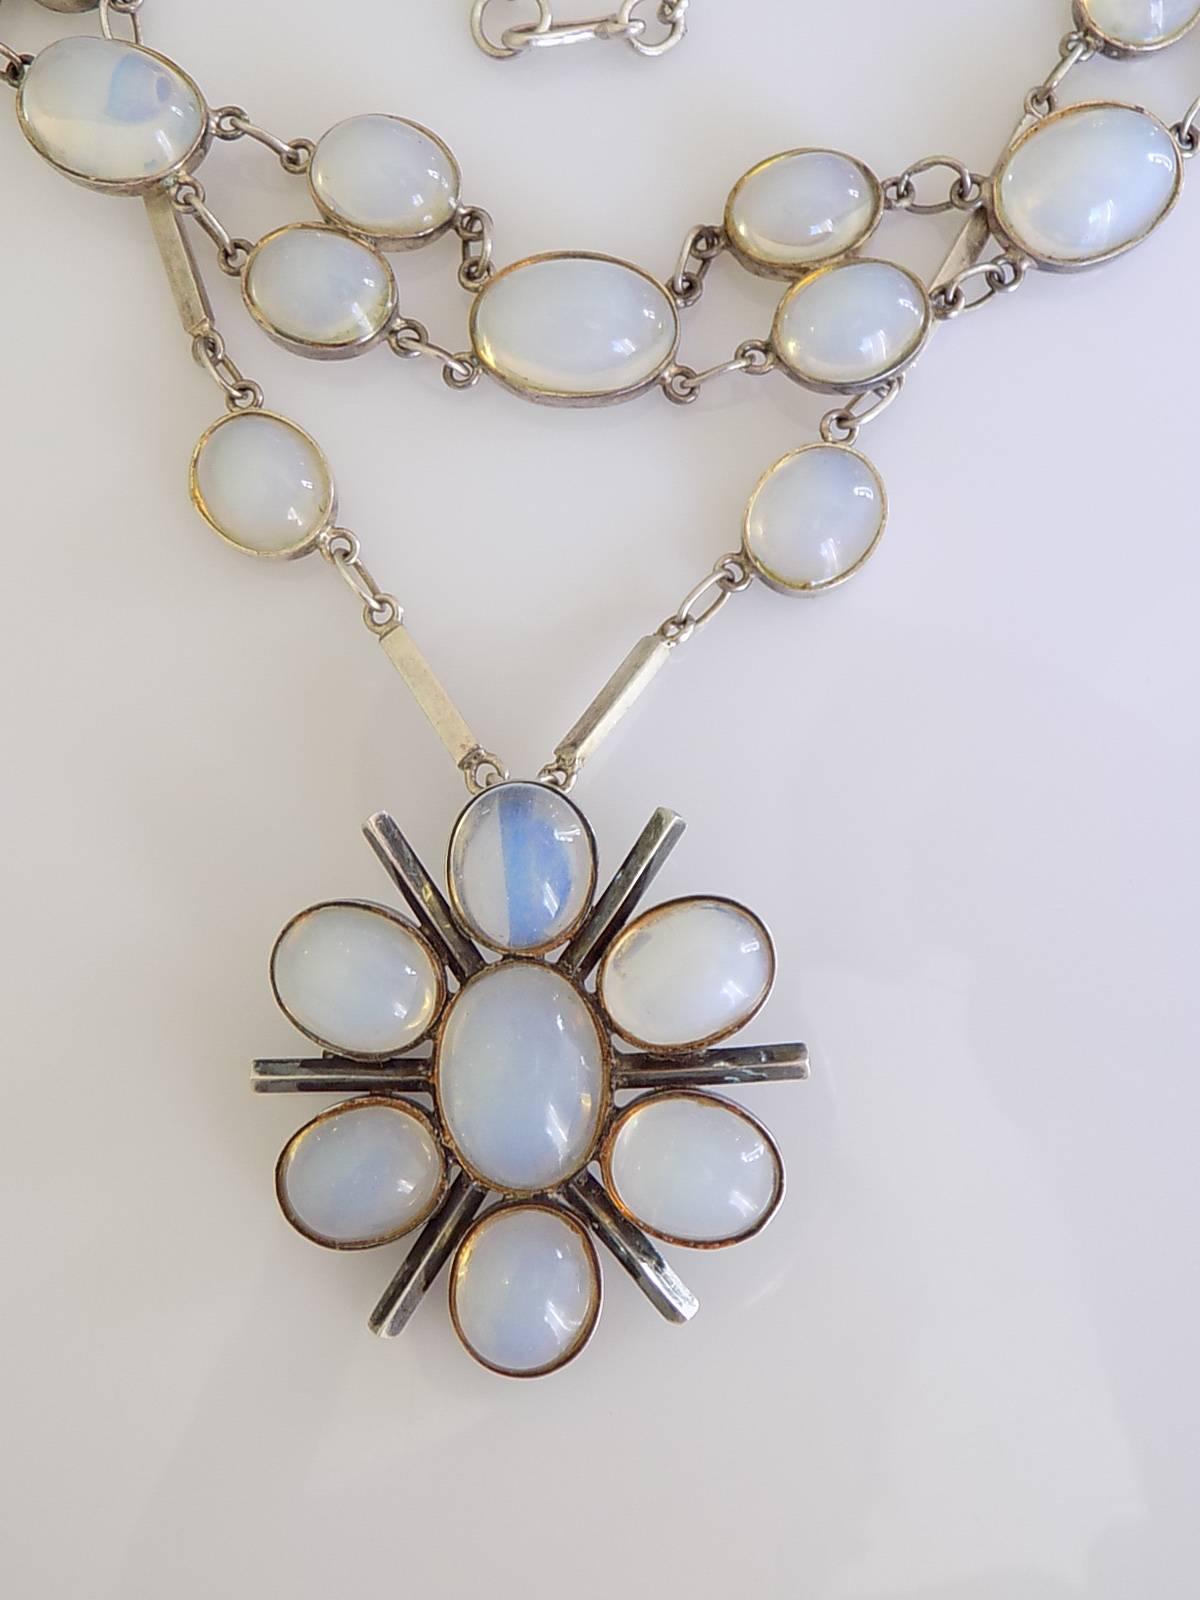 A Stunning Art Deco c.1920s/30s Sterling Silver set with a Moonstone paste also known as Opaline glass. 
The set included:
Necklace 18 1/2" including clasp;
All in One brooch/pendant width 42mm;
Bracelet 7 1/2";
Screw back drop earrings,